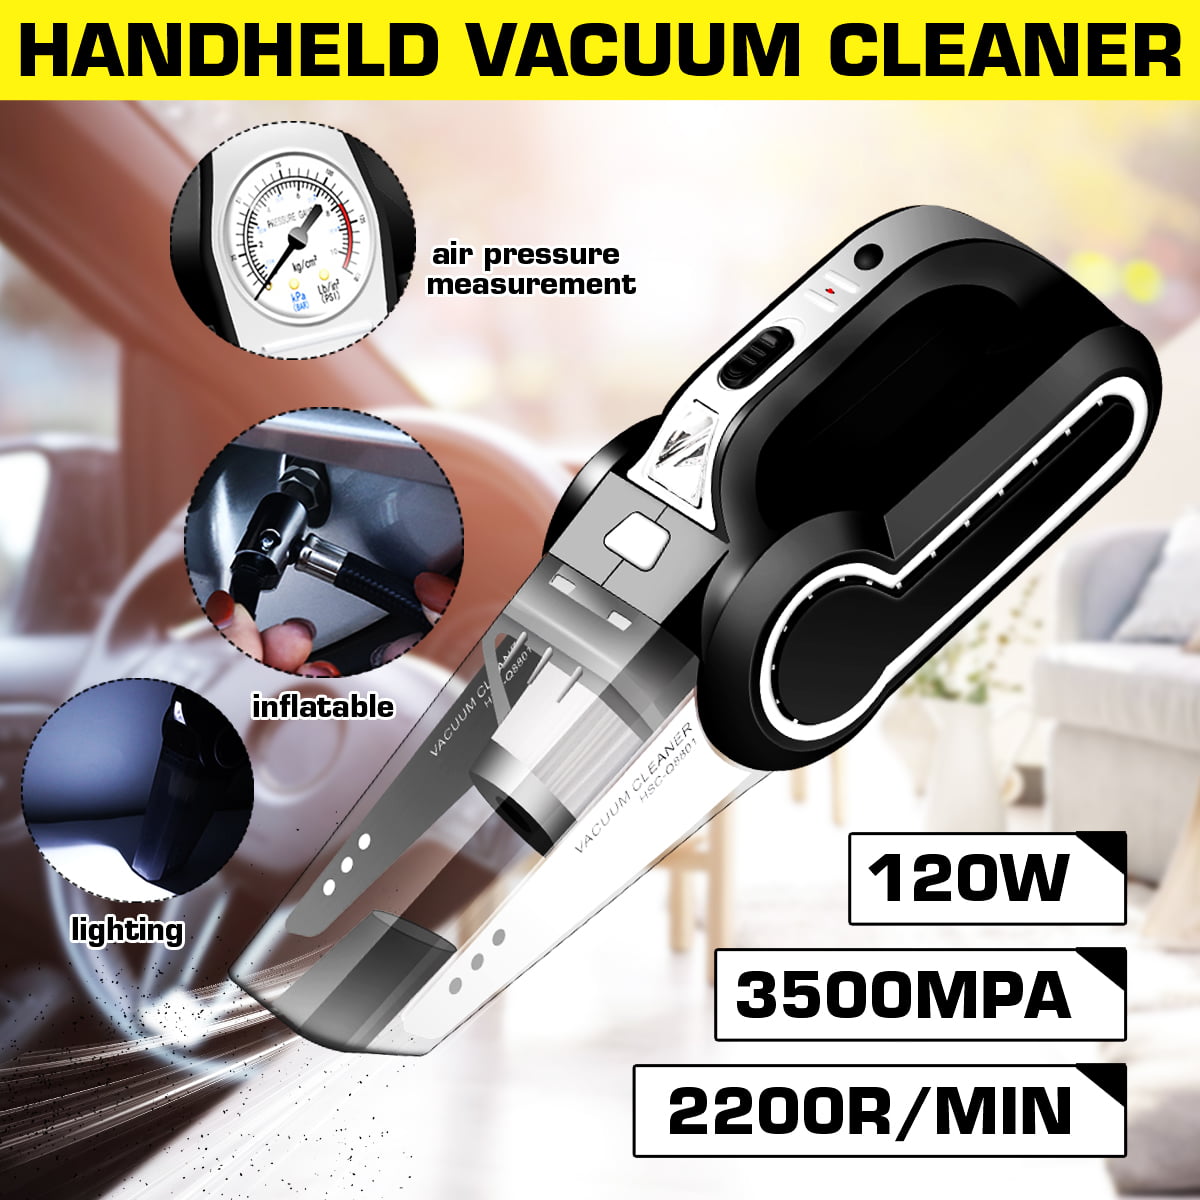 DC 12V 6000PA High Power Vacuum for Car Cleaning Wet/Dry Use Tire Pressure Gauge and Car Inflator Portable Car Vacuum Cleaner Multifunction Handheld Car Vacuum with Searchlight